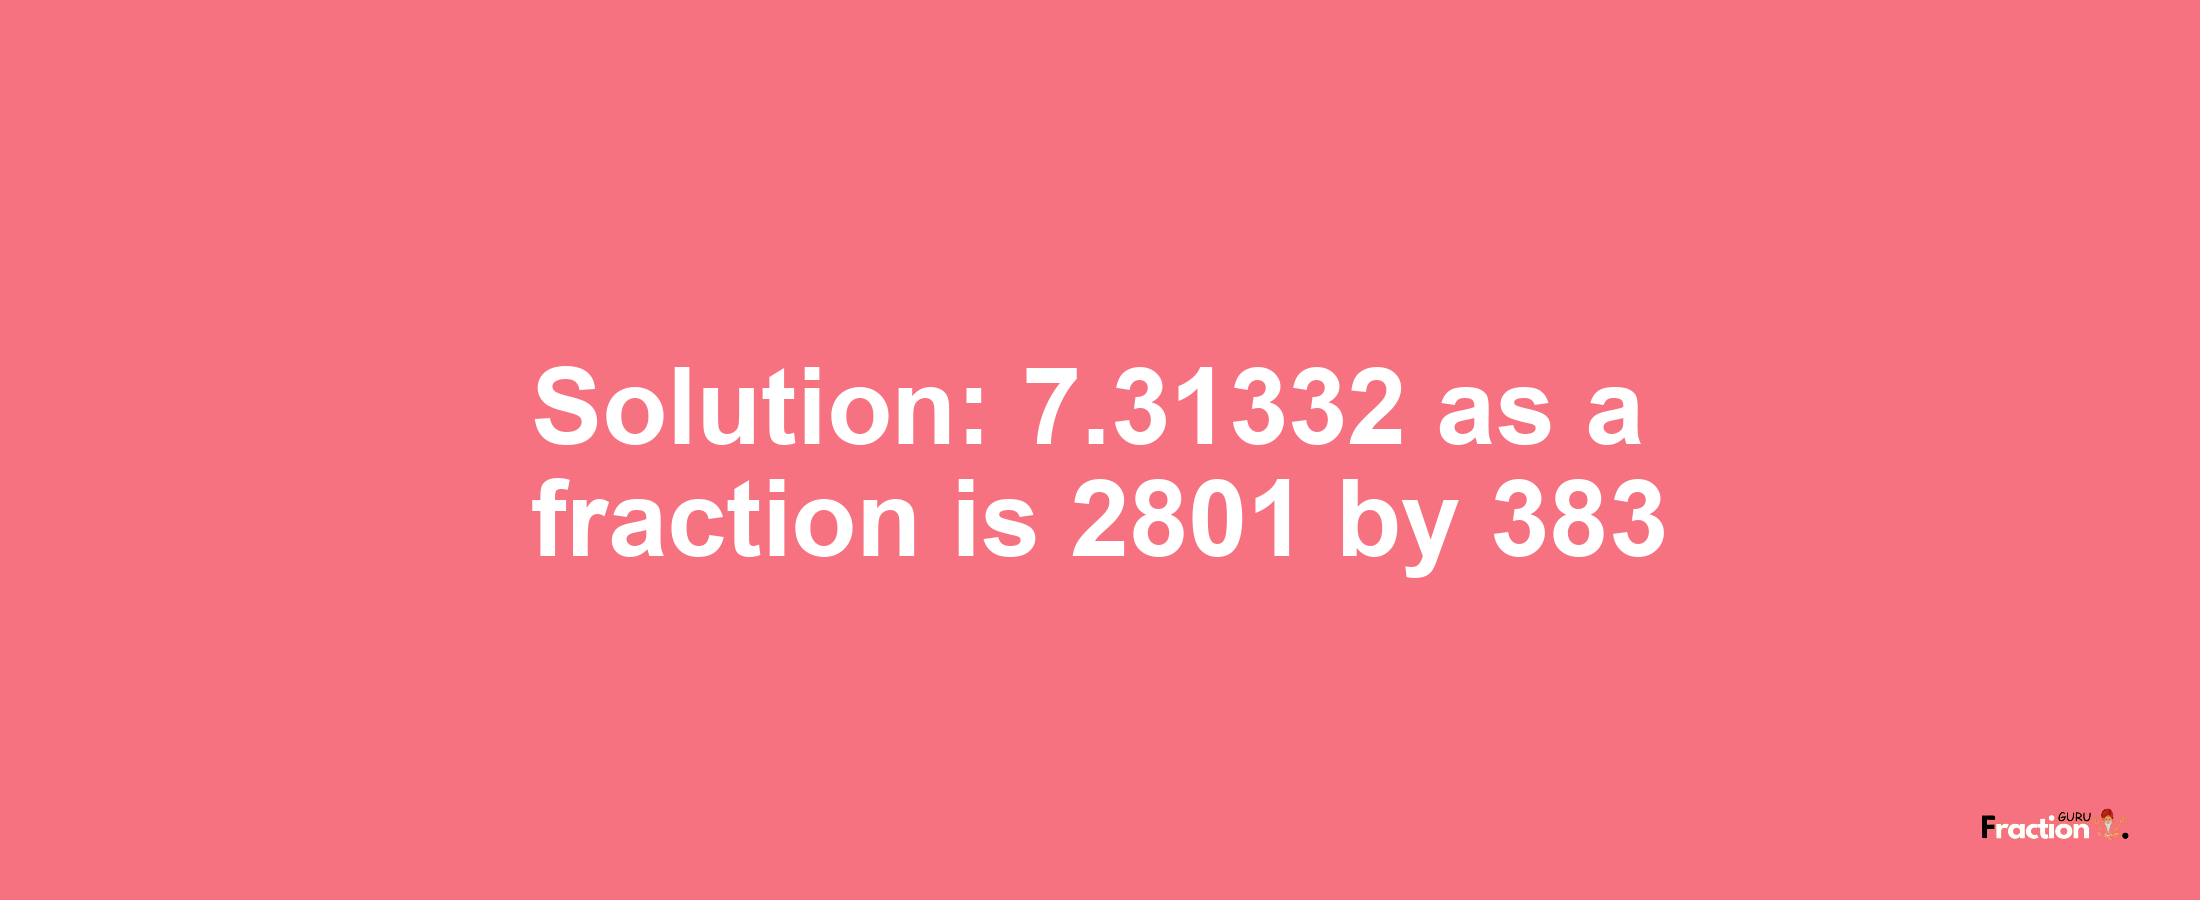 Solution:7.31332 as a fraction is 2801/383